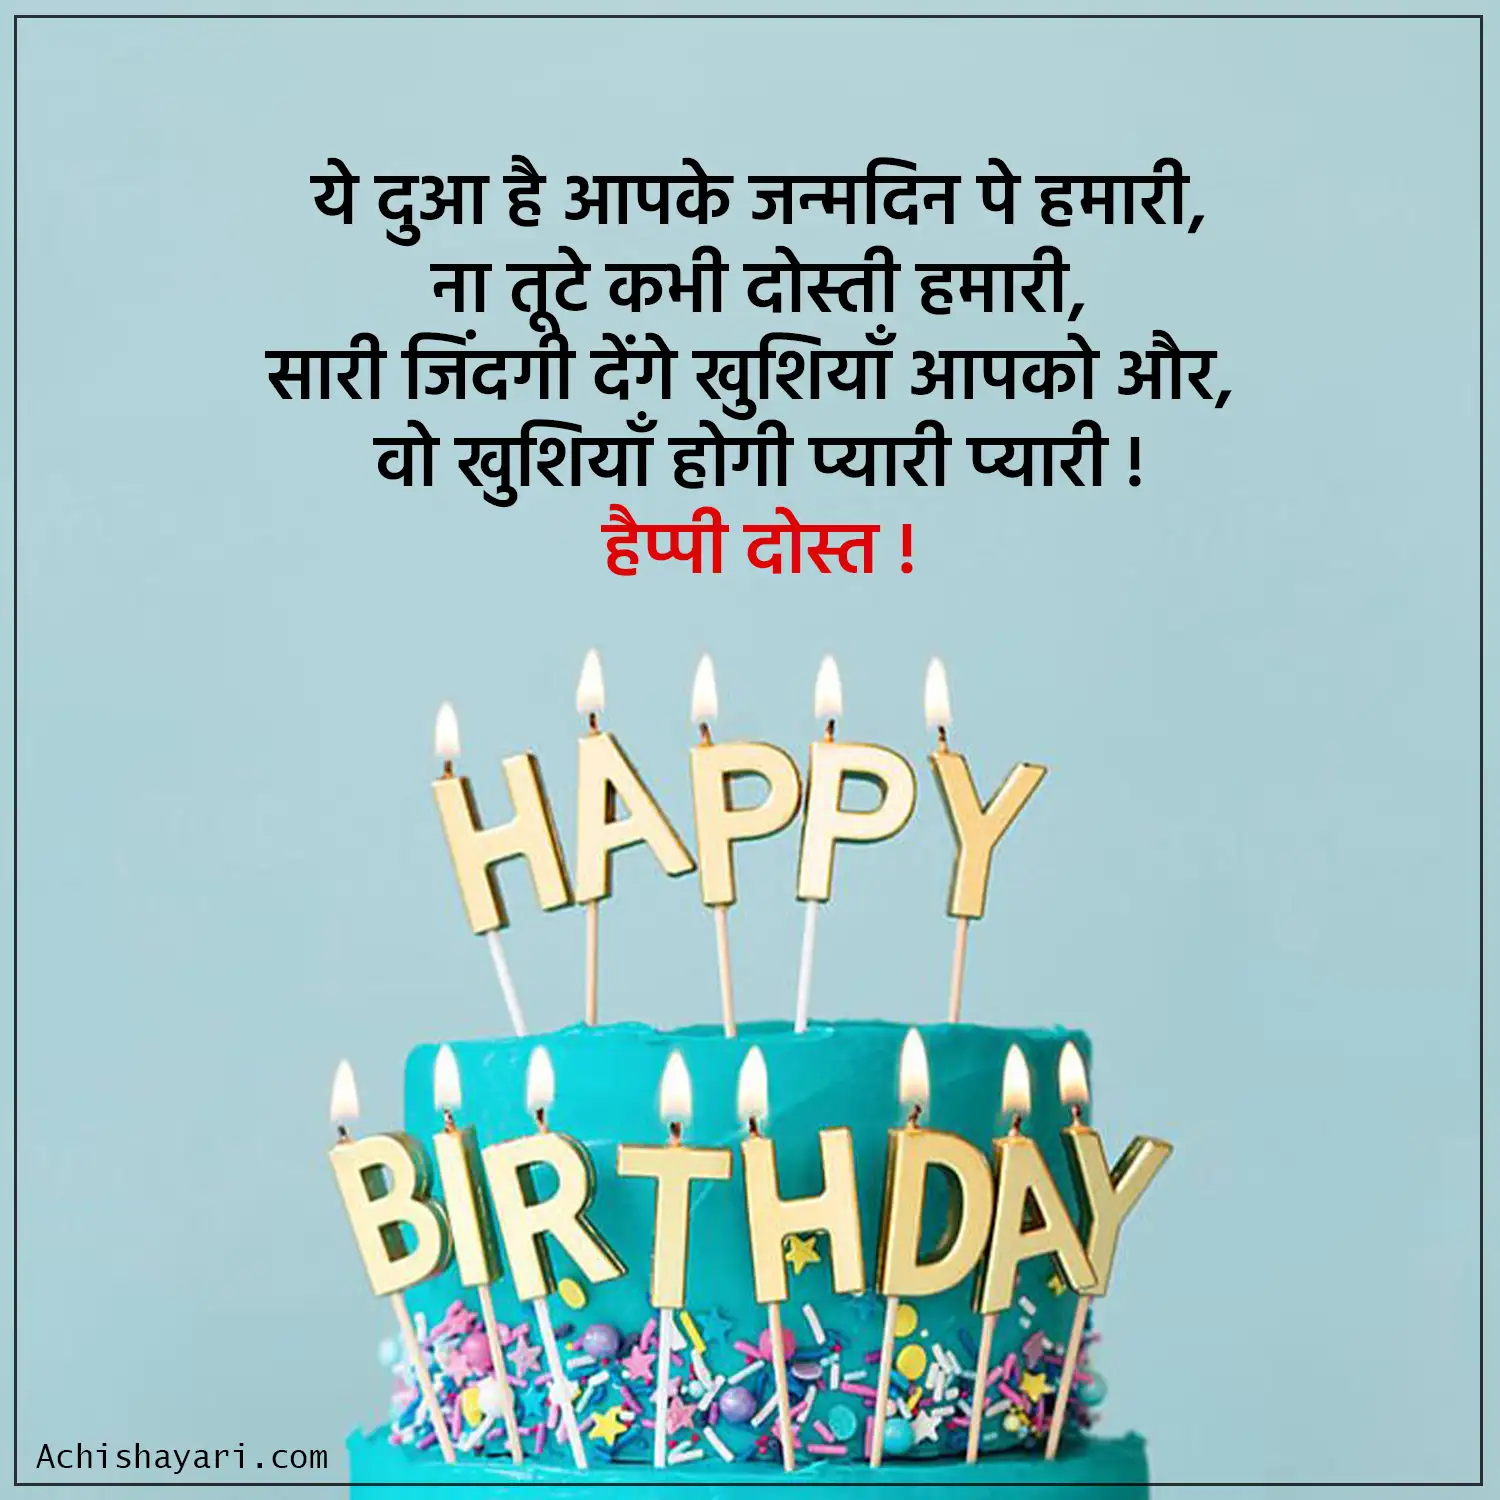 Birthday Wishes For Friend in Hindi